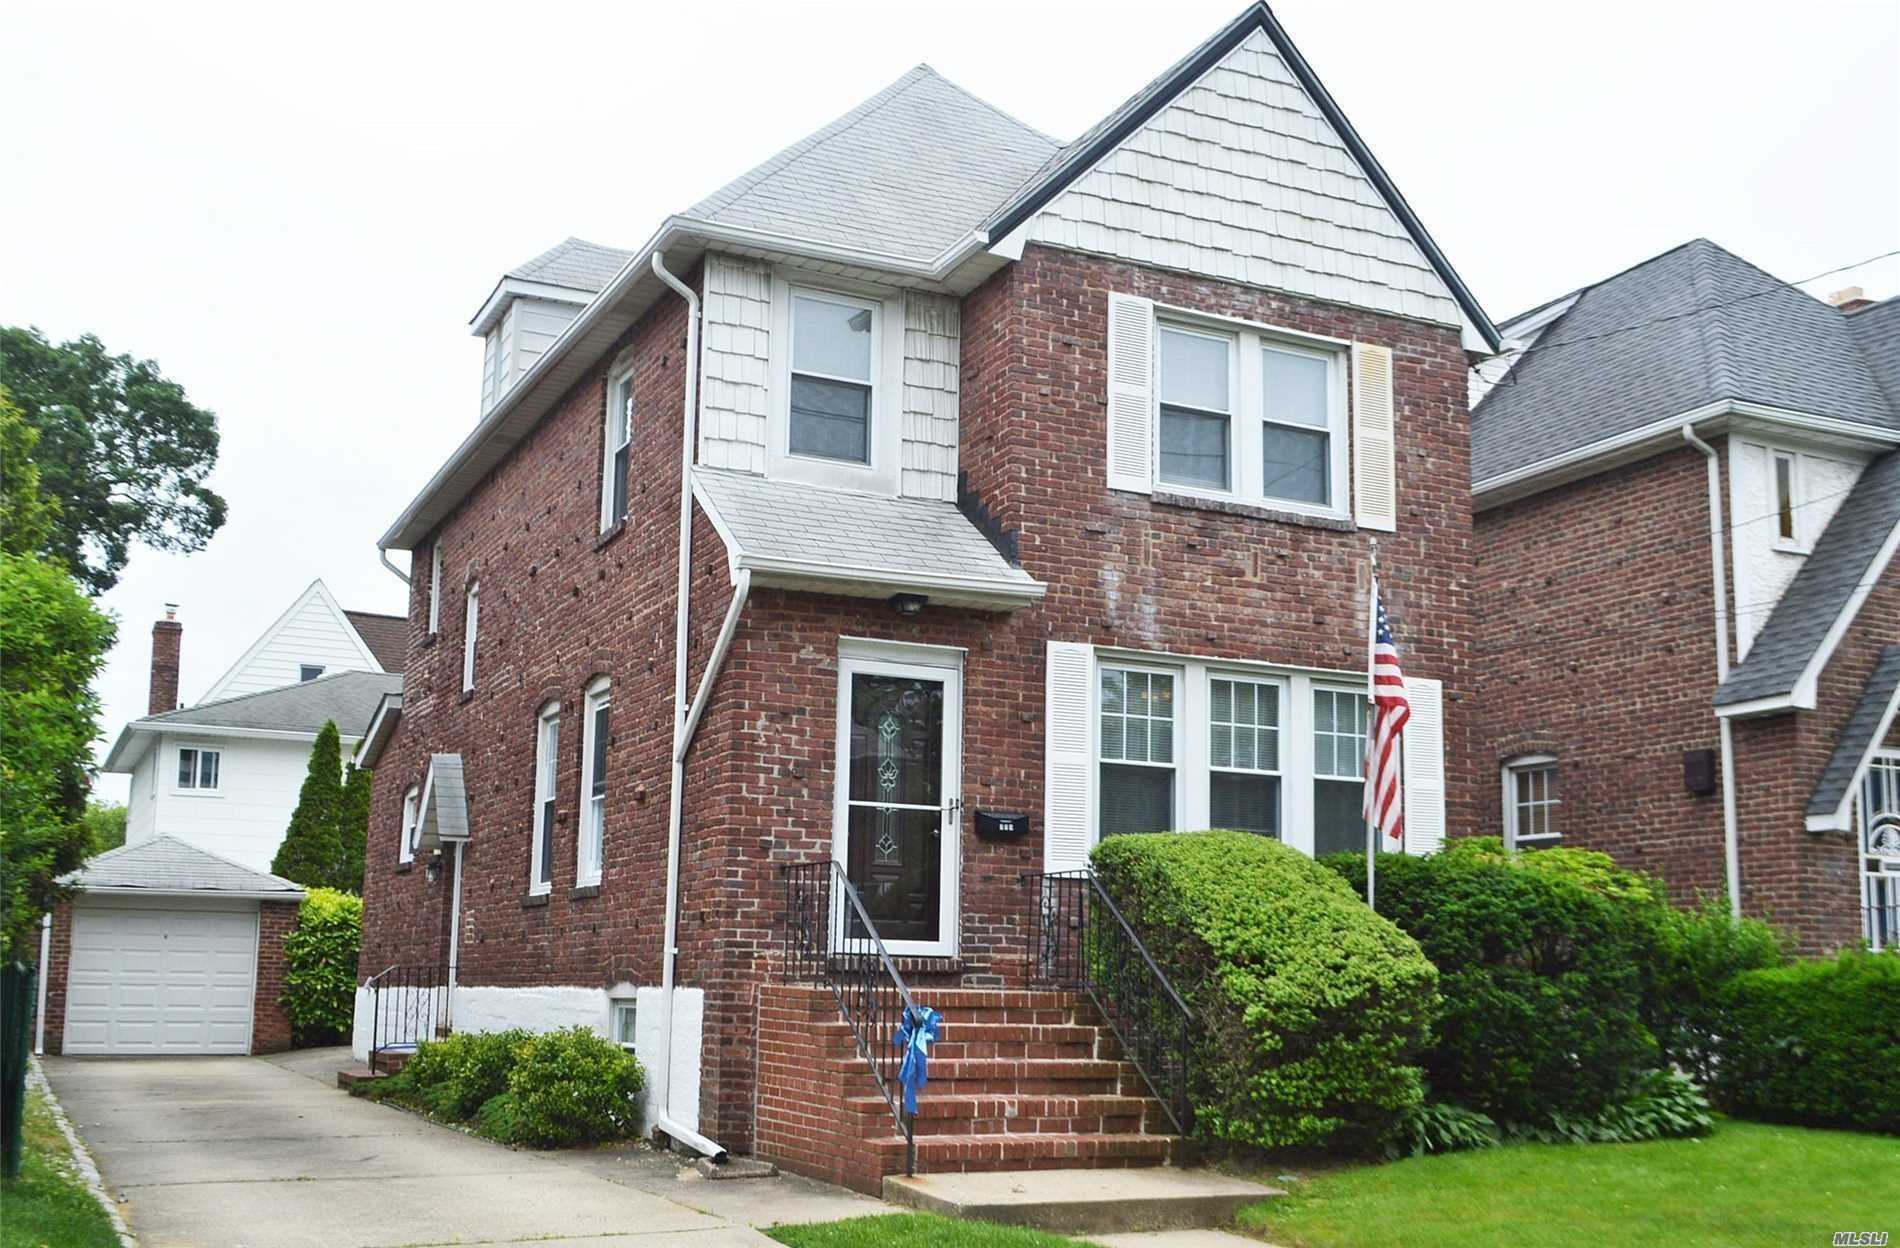 Majestic Brick Tudor In The Yorkshire Section Of Lynbrook, Ready To Move Into, But At A Price To Mold Into Your Dream Home, Spacious Set-Up Includes: Entry Foyer, Living Rm W/Fireplace, Fdr, Eik, Half Bath, 3 Bedrm, Updated Full Bath, Full Basement, Attic.